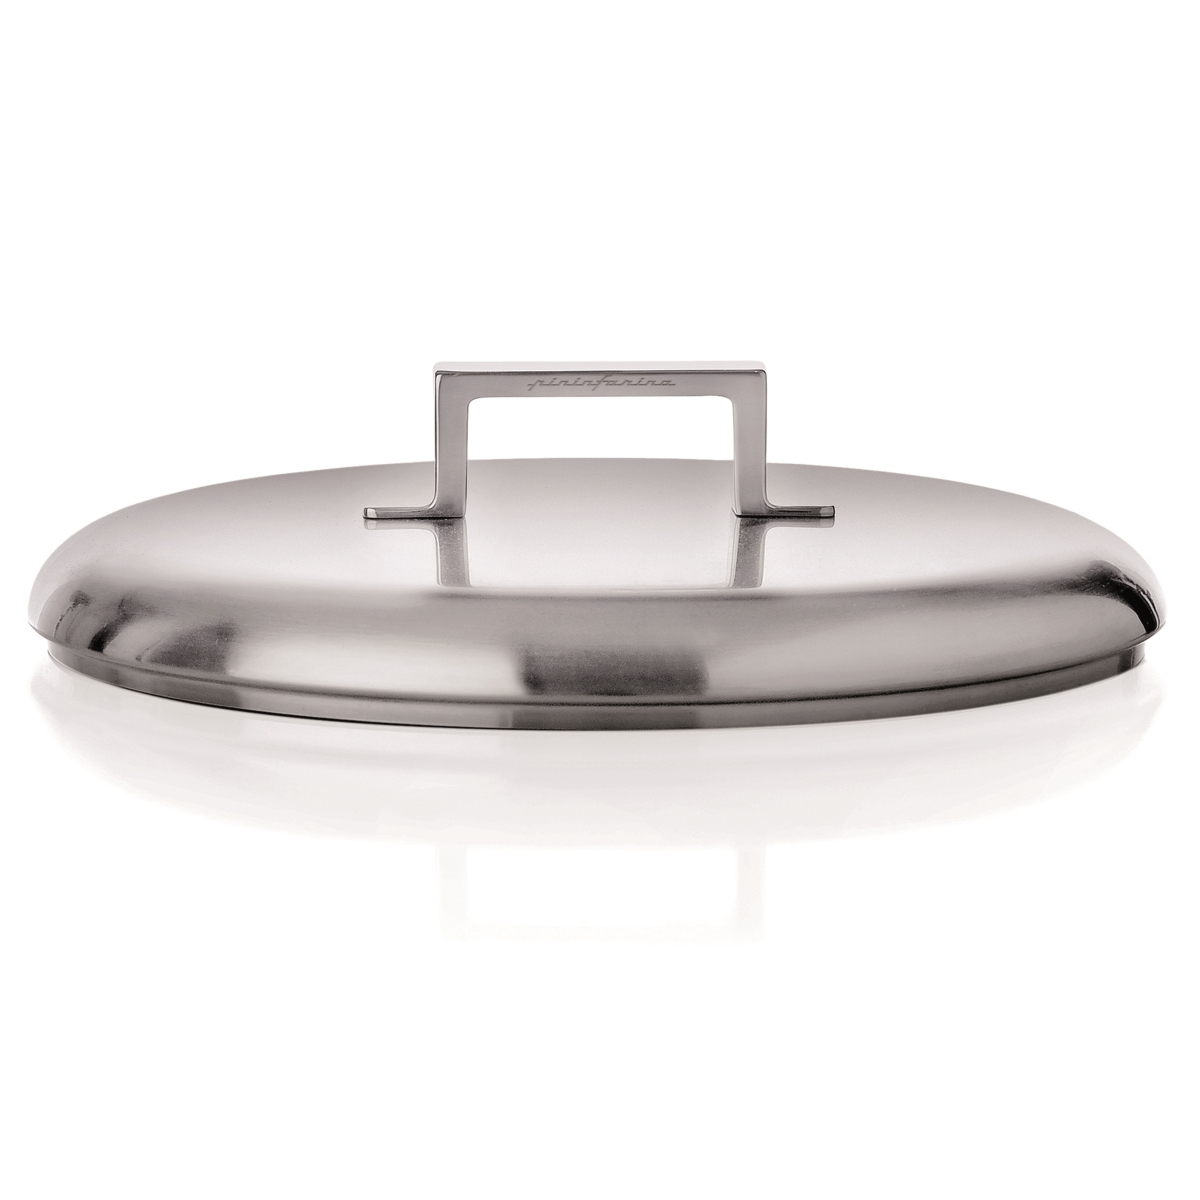 Picture of Mepra 30205122 22 cm Stainless Steel Lid - Stile